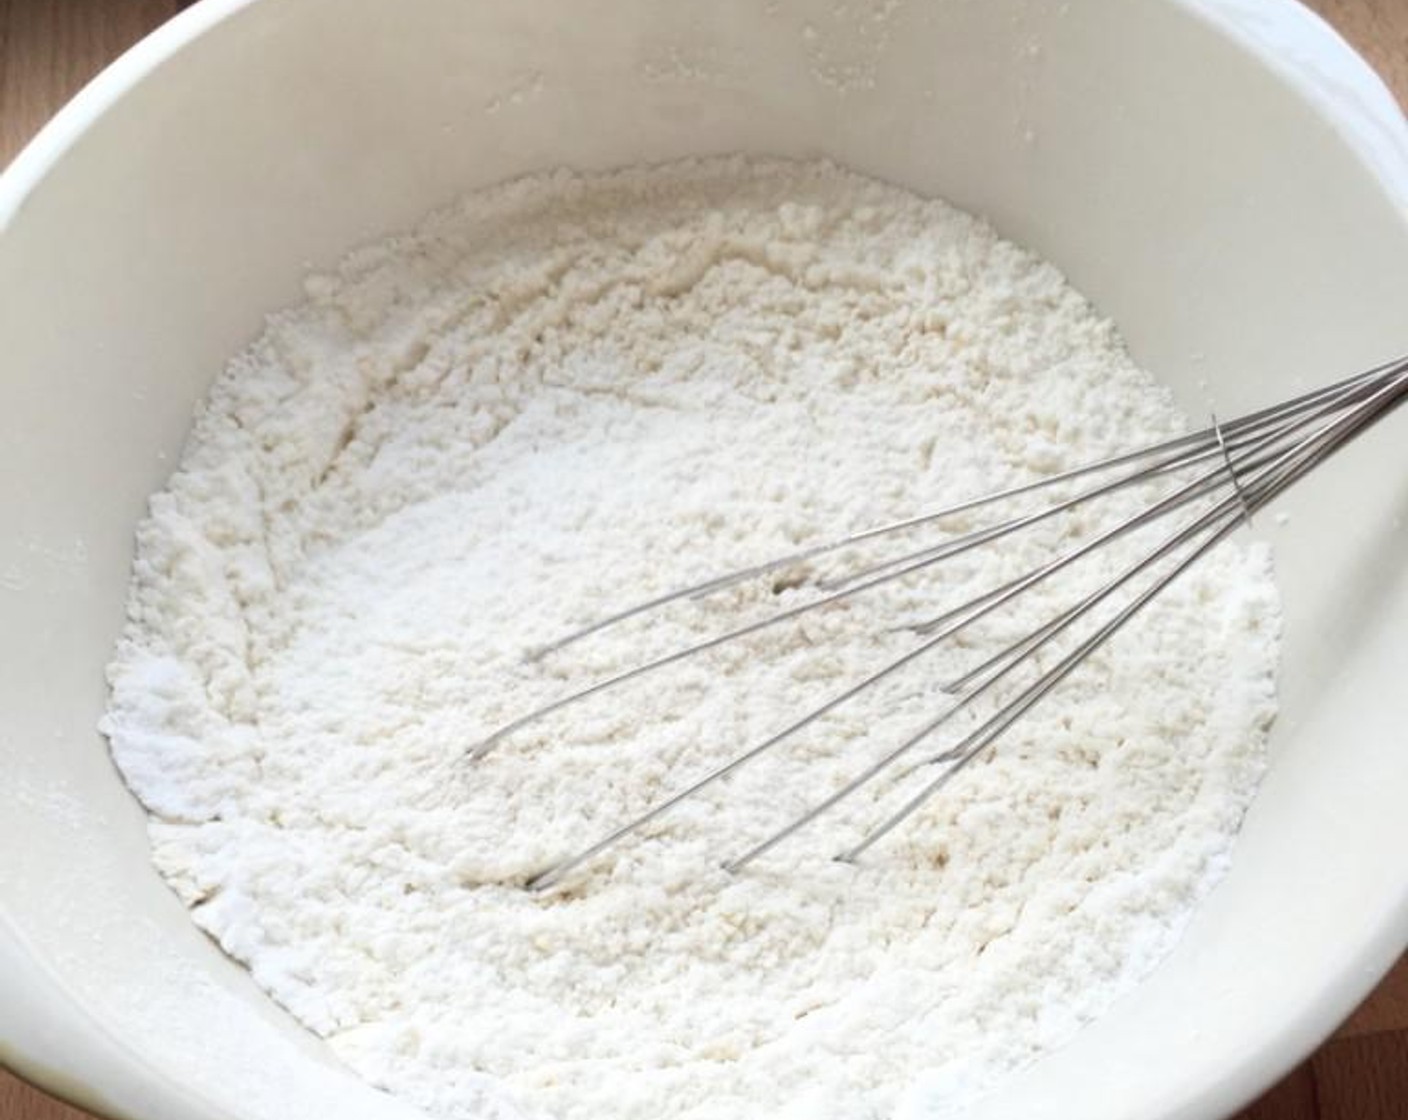 step 6 Add All-Purpose Flour (3 cups), Corn Starch (1/2 cup), Powdered Confectioners Sugar (1/3 cup), and Salt (1/4 tsp) into a large mixing bowl. Mix well to combine.